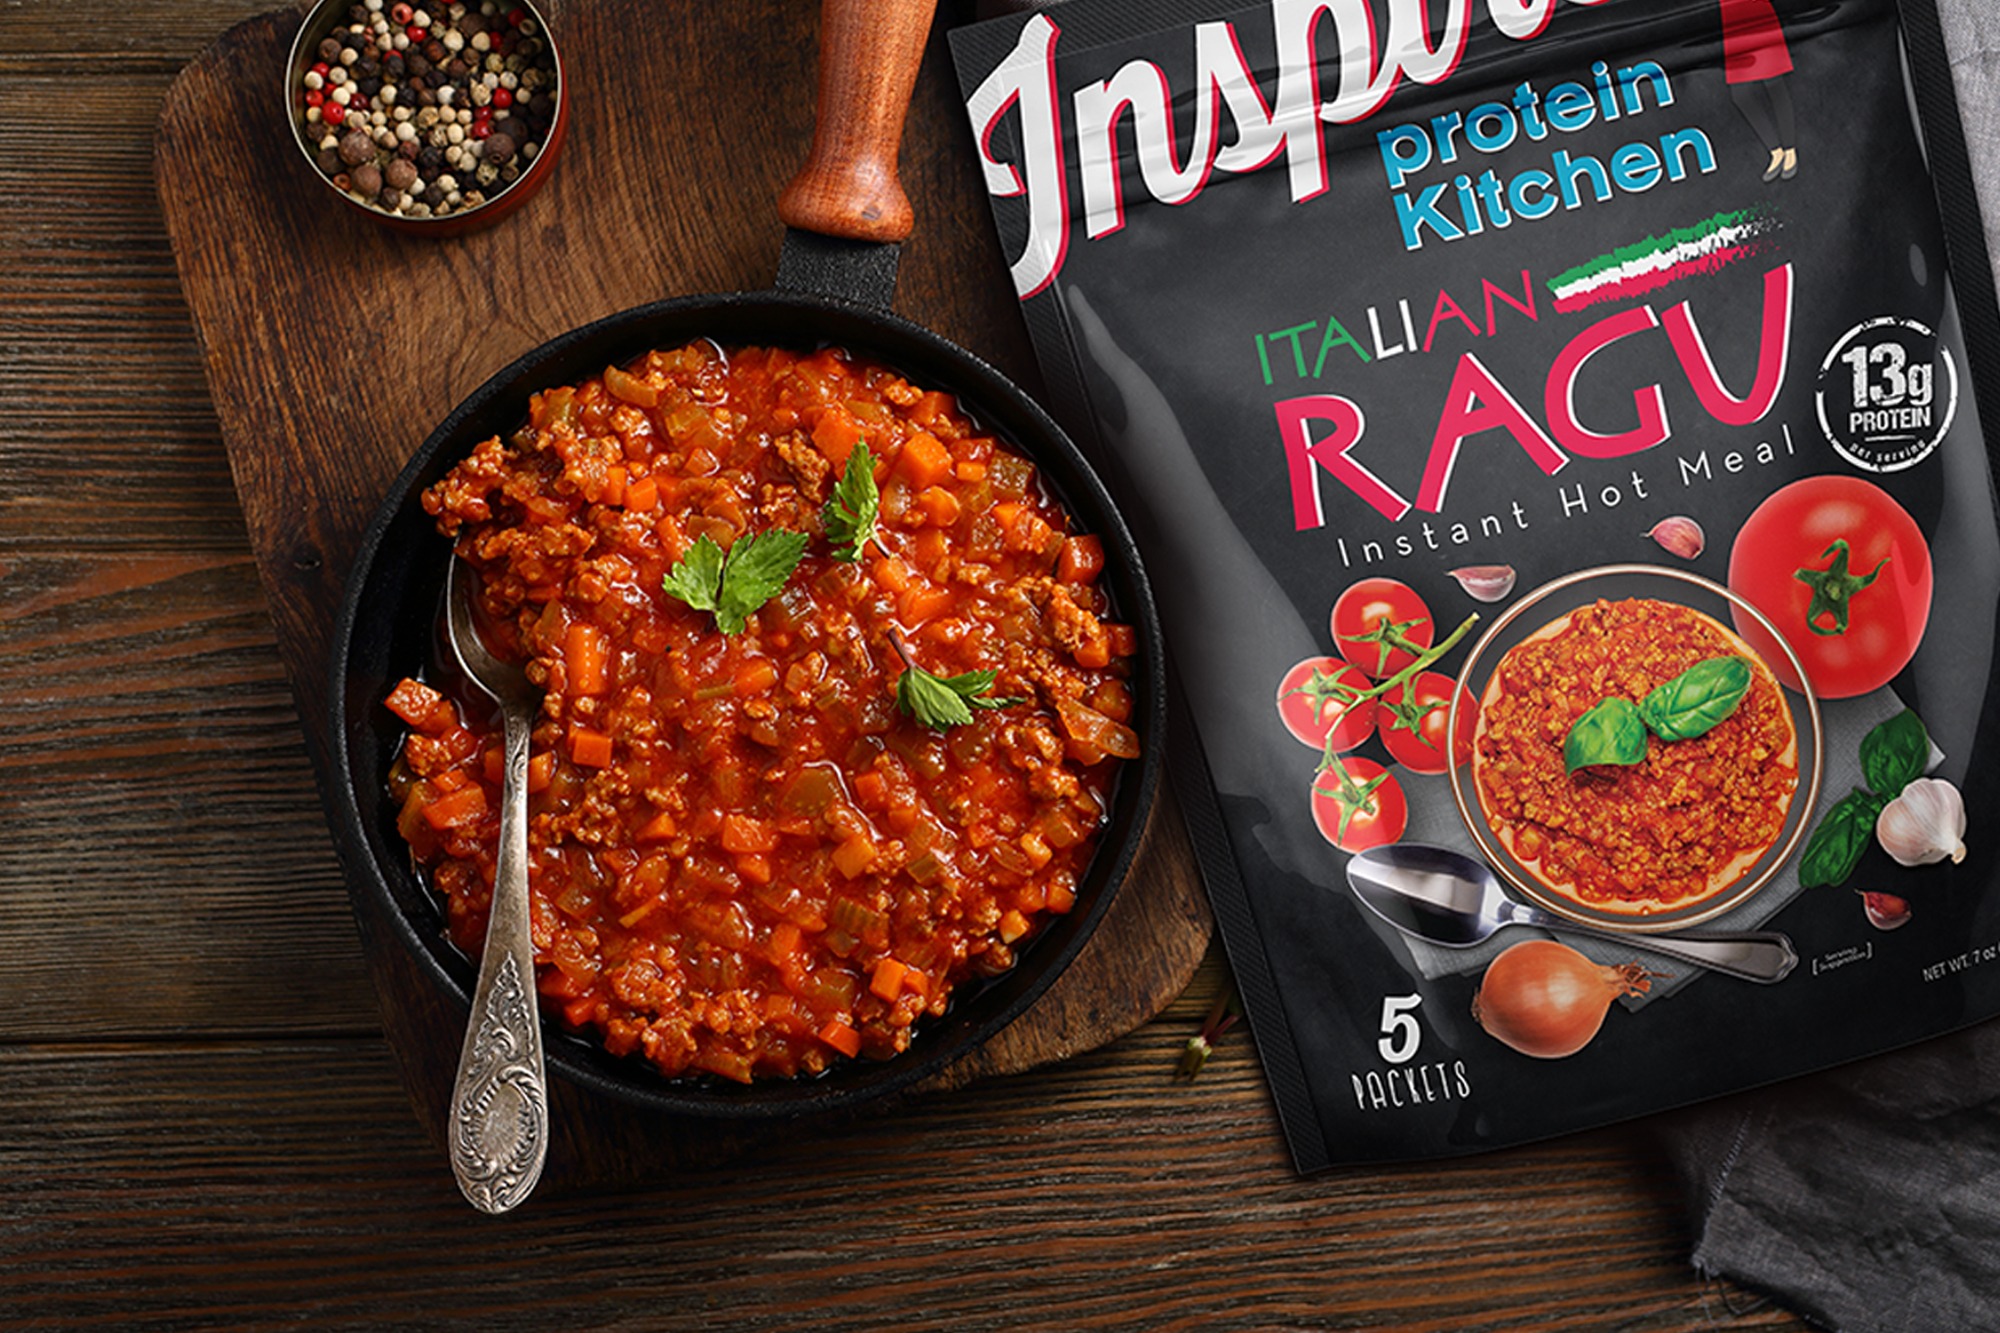 Bariatric Eating Inspire Protein Kitchen Italian Ragu Package Design by Octane Advertising Design